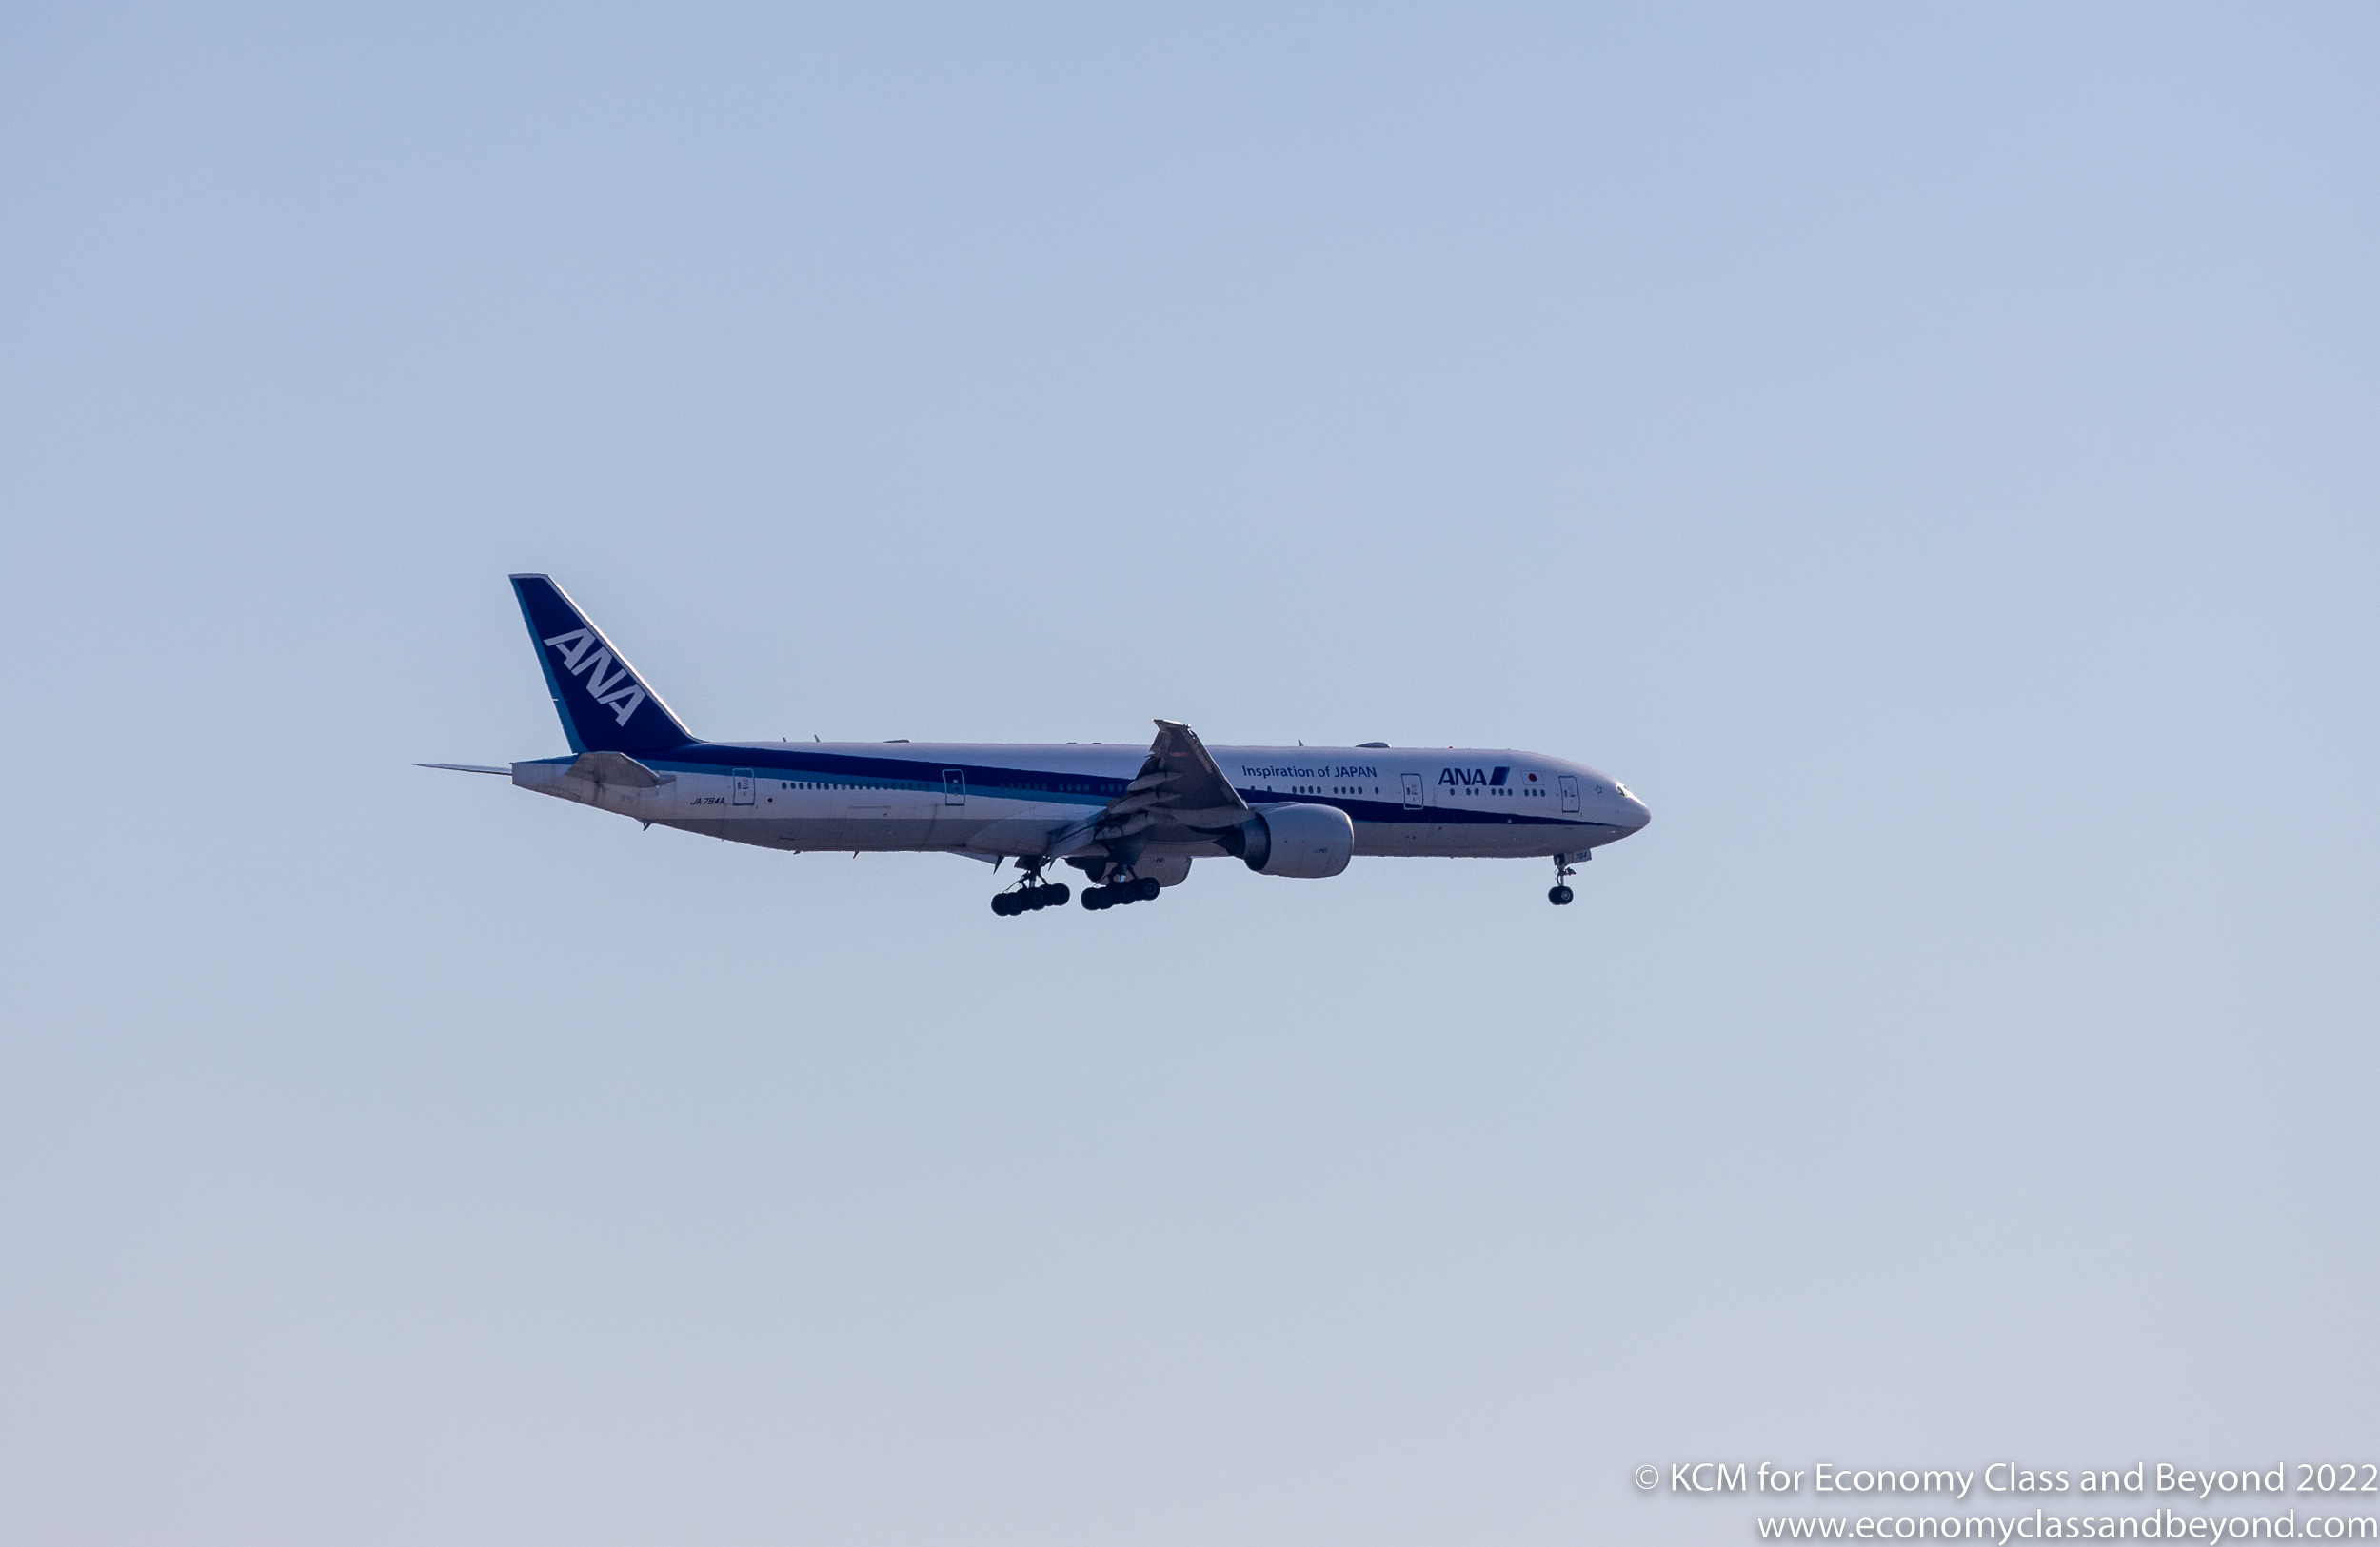 Airplane Art - ANA Boeing 777-300ER on finals for Chicago O'Hare 